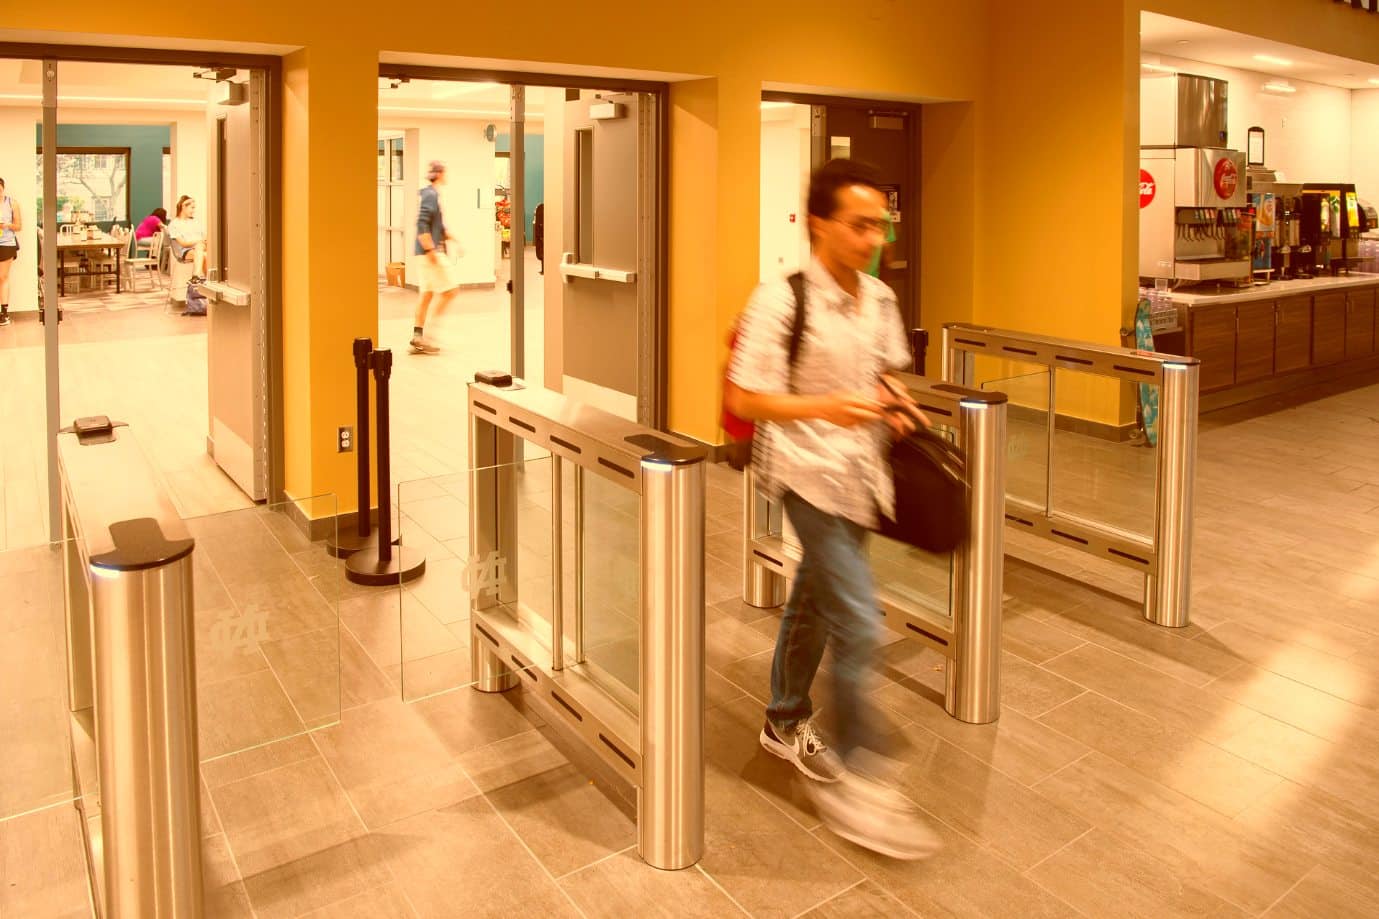 What’s the difference between entrance and access control?